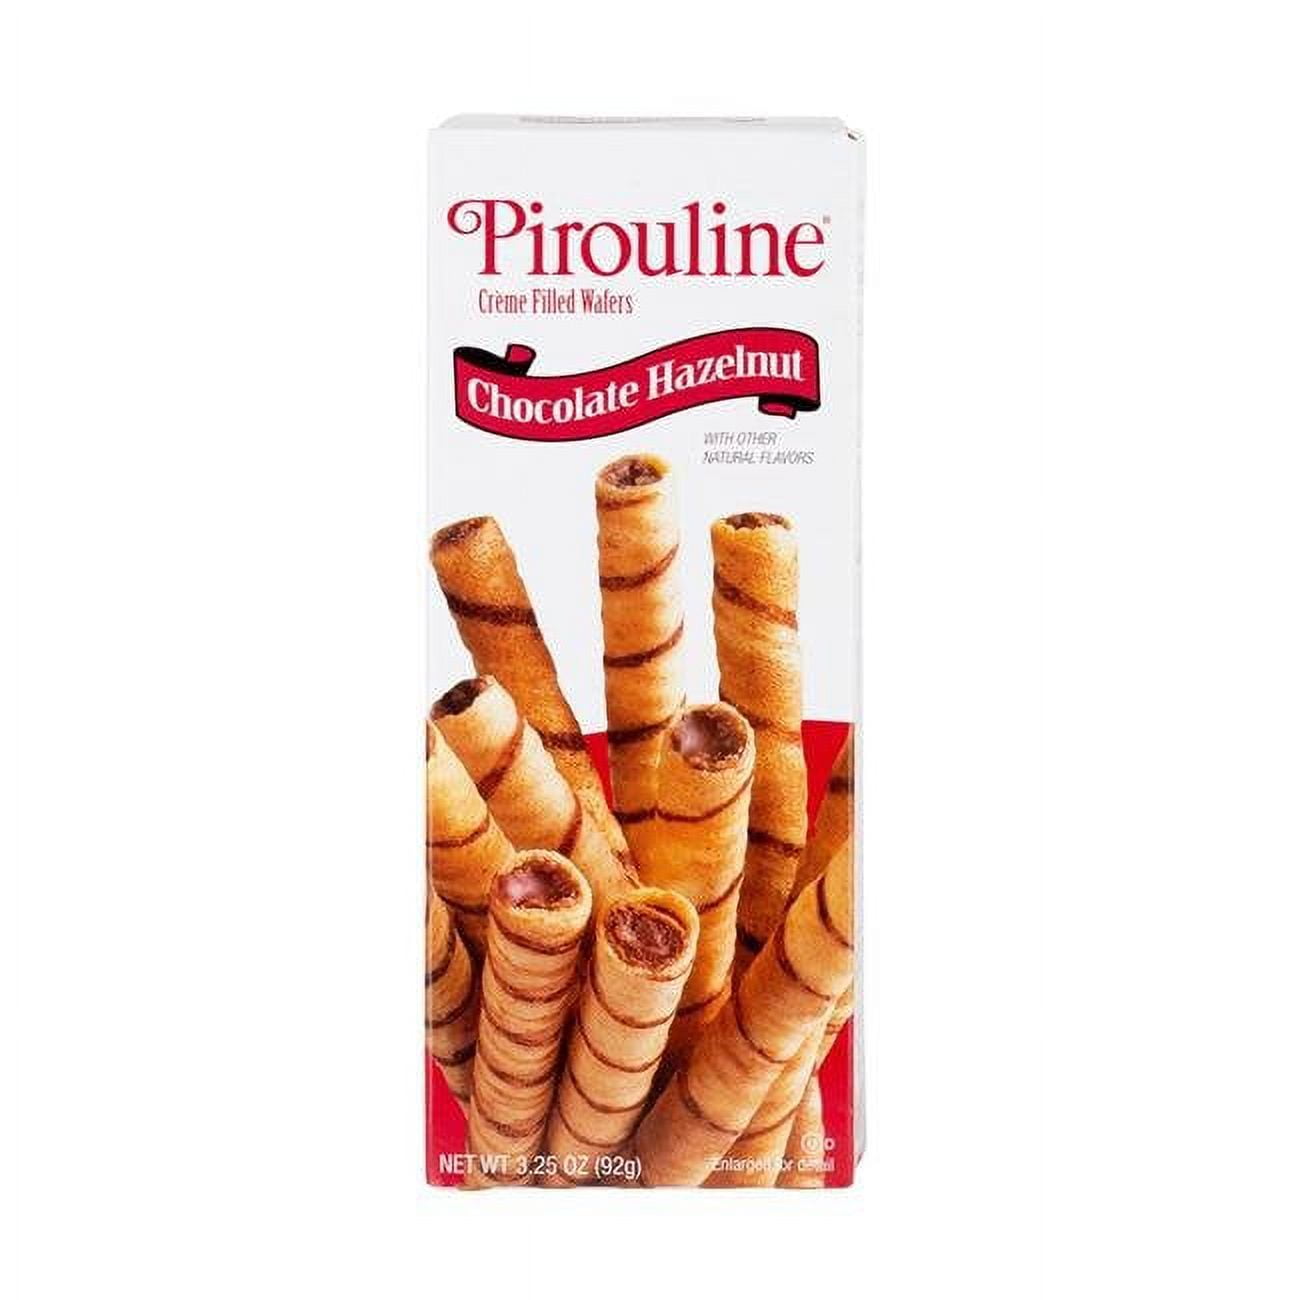 Picture of Pirouline 9068814 3.25 oz Boxed Chocolate Hazelnut Cookies